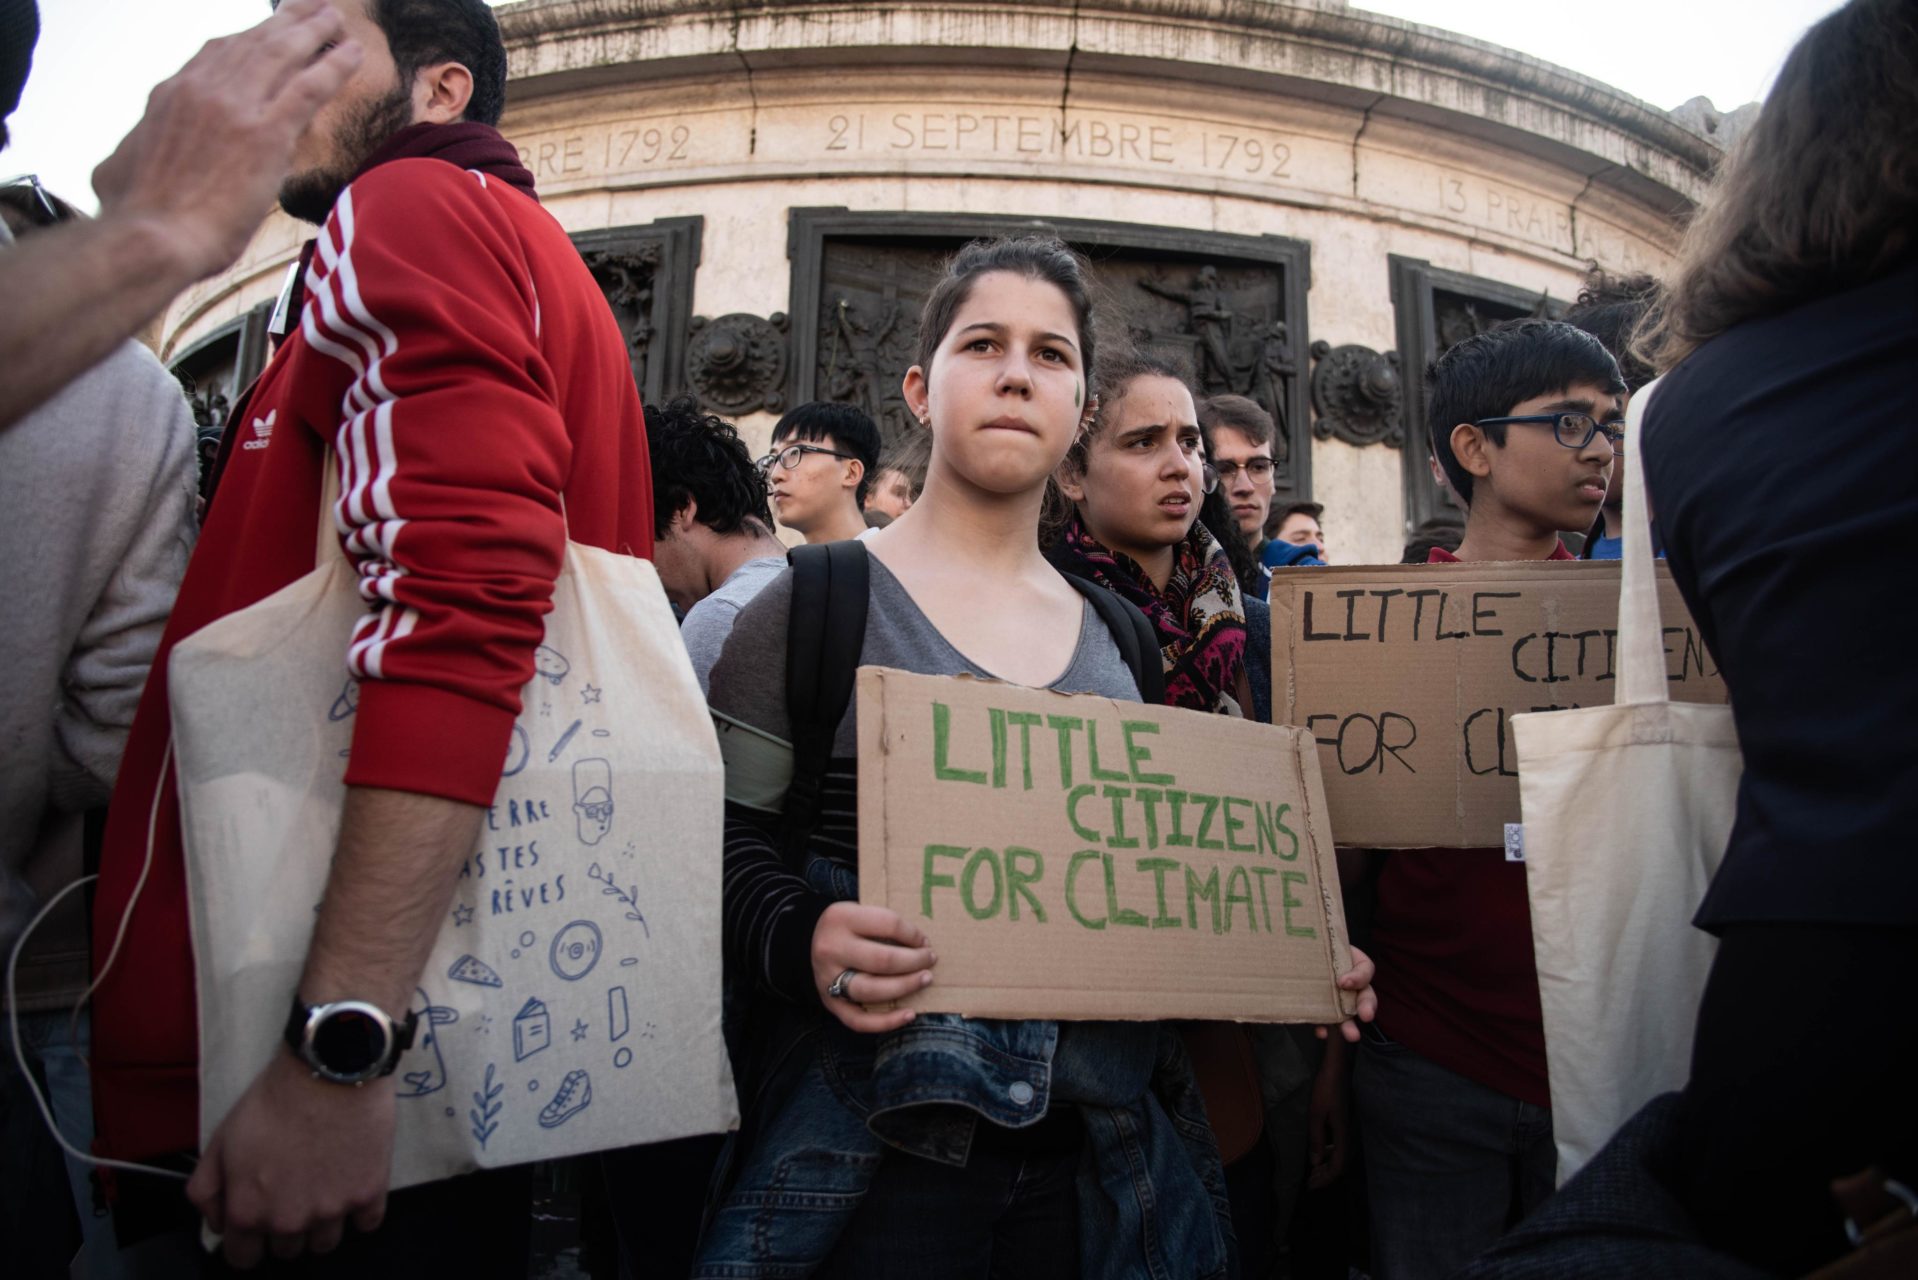 Little citizens for climate